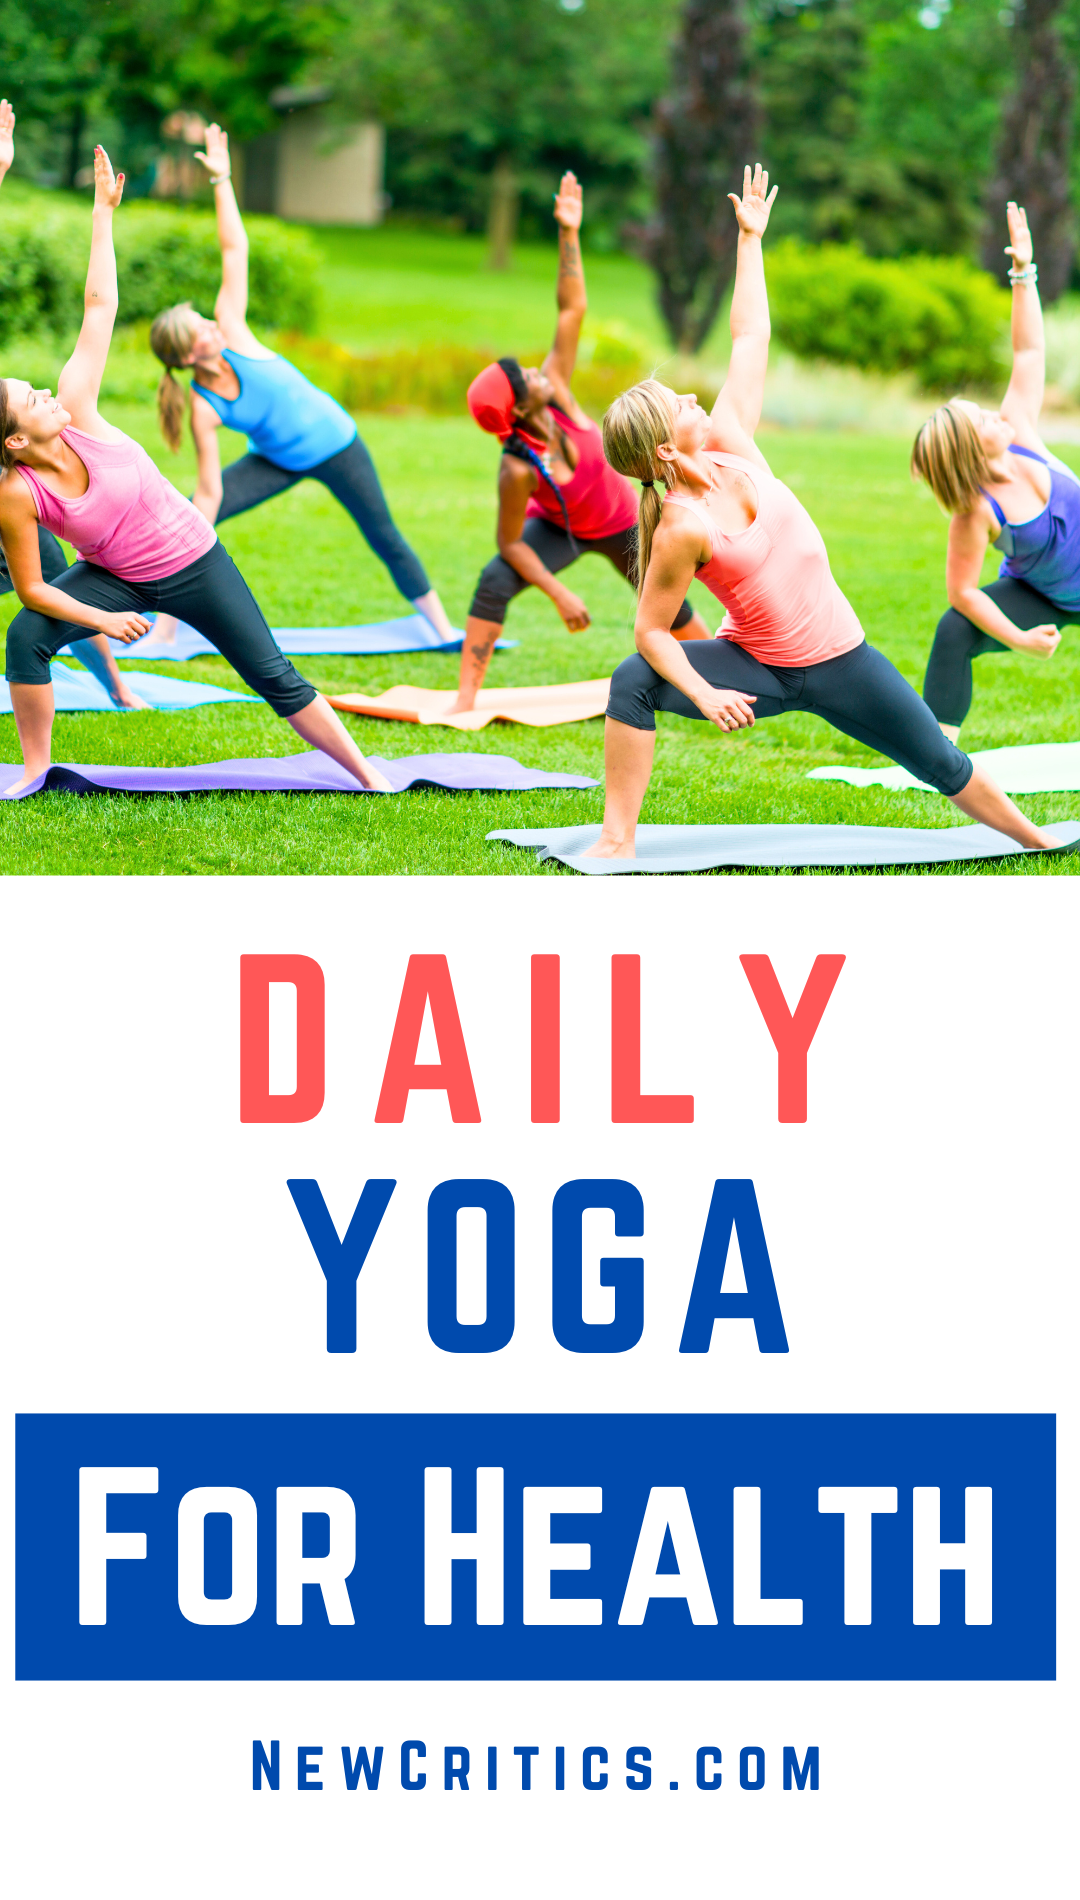 Daily Yoga For Health / Canva